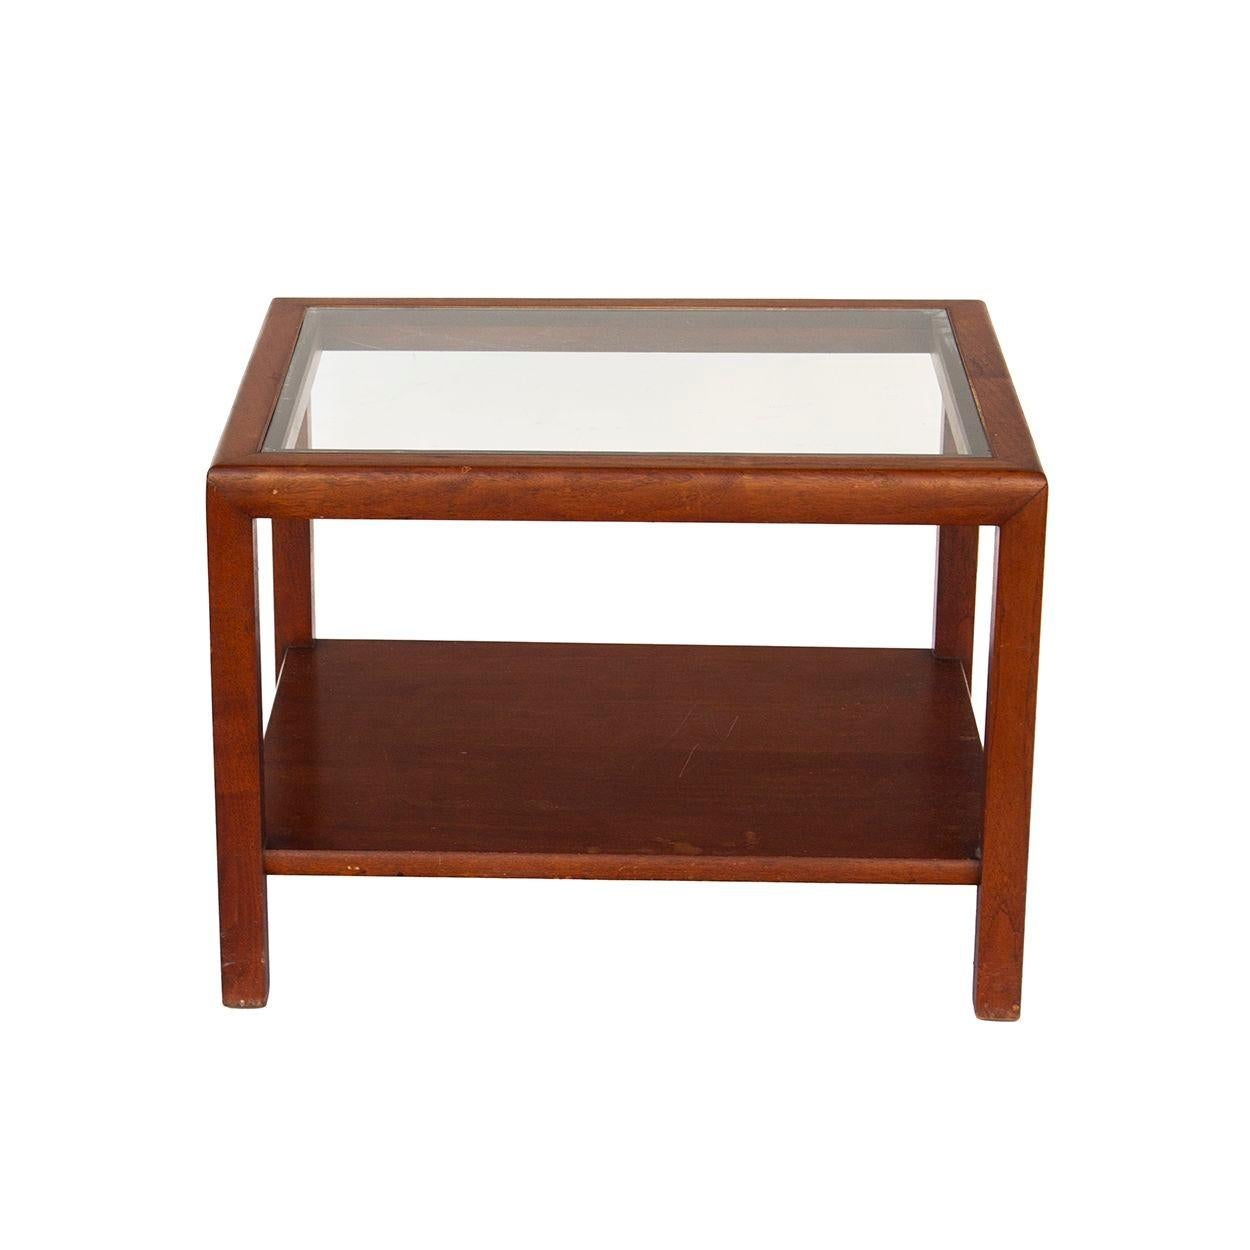 American Parsons End Table in Walnut with Glass Top, Henredon attr. For Sale